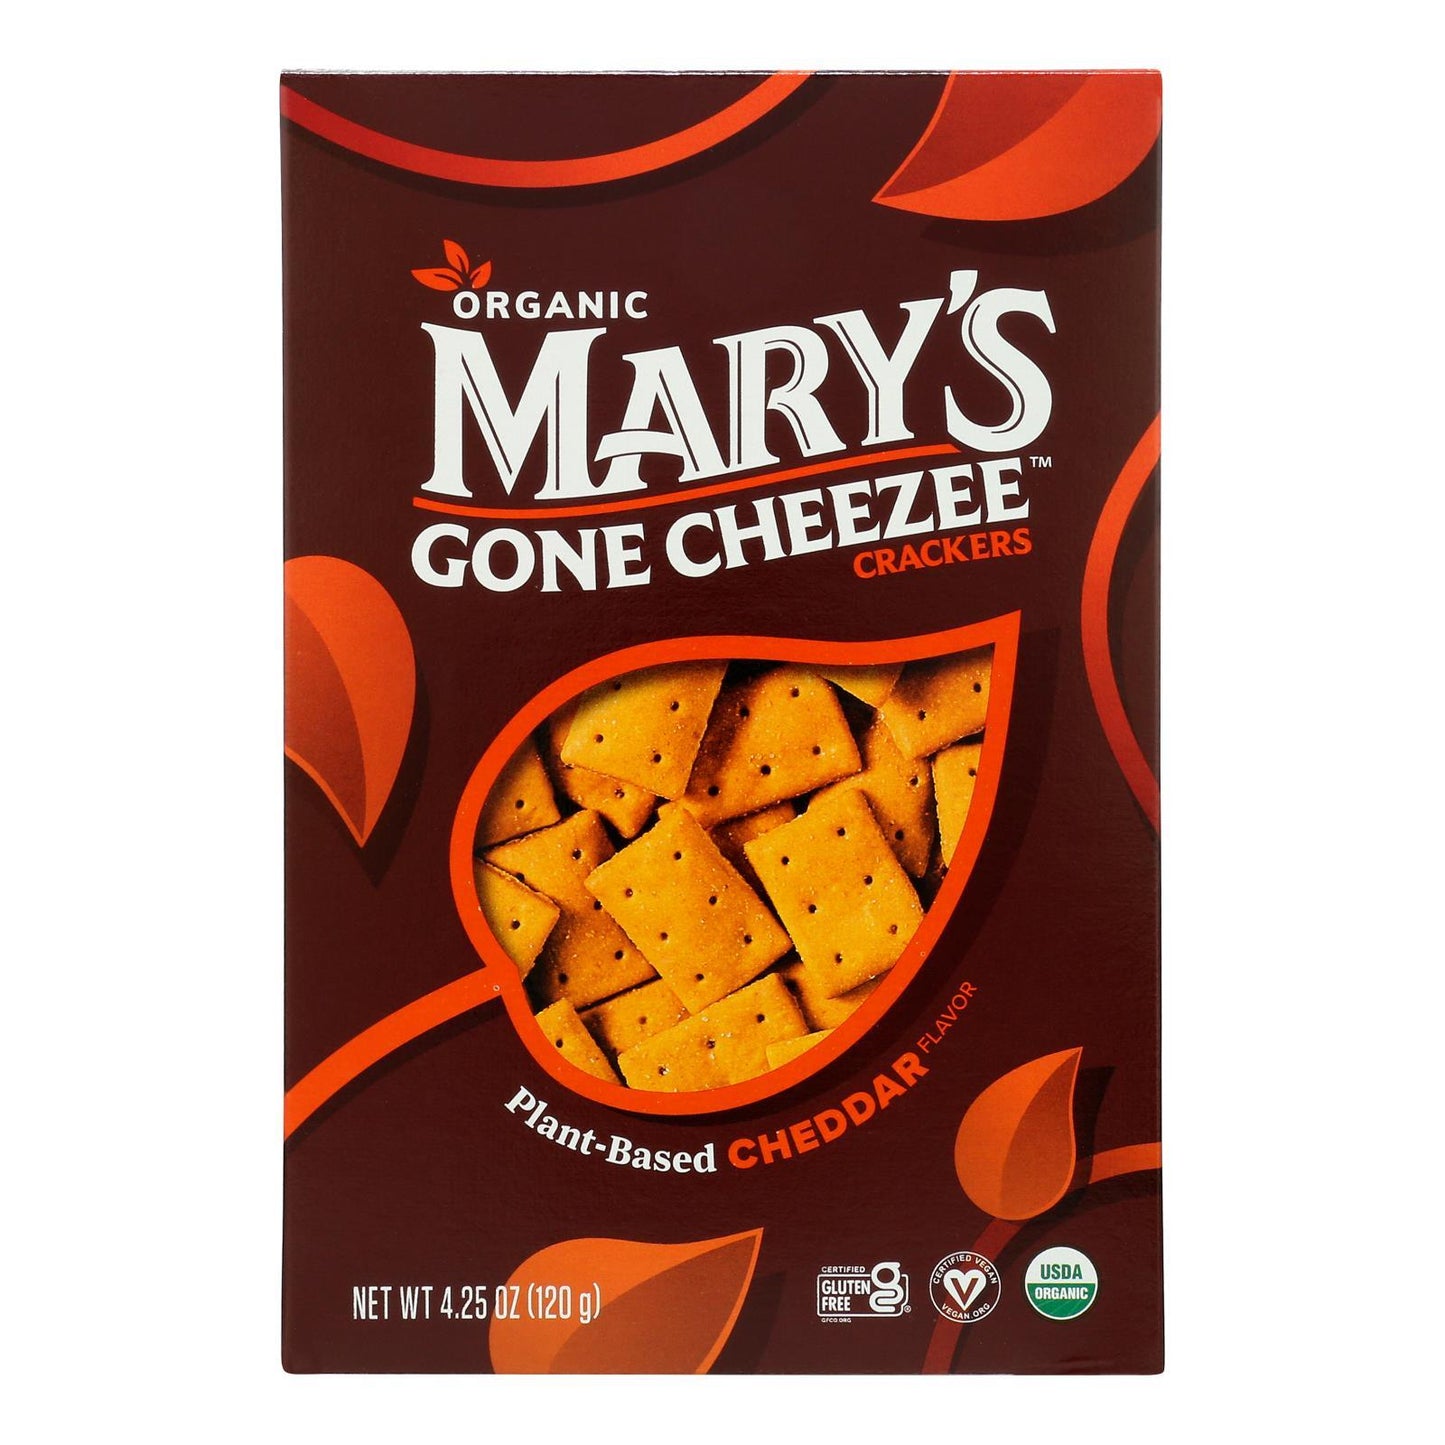 Mary's Gone Crackers - Crckrs Plnt Bsd Ched - Case Of 6-4.25 Oz